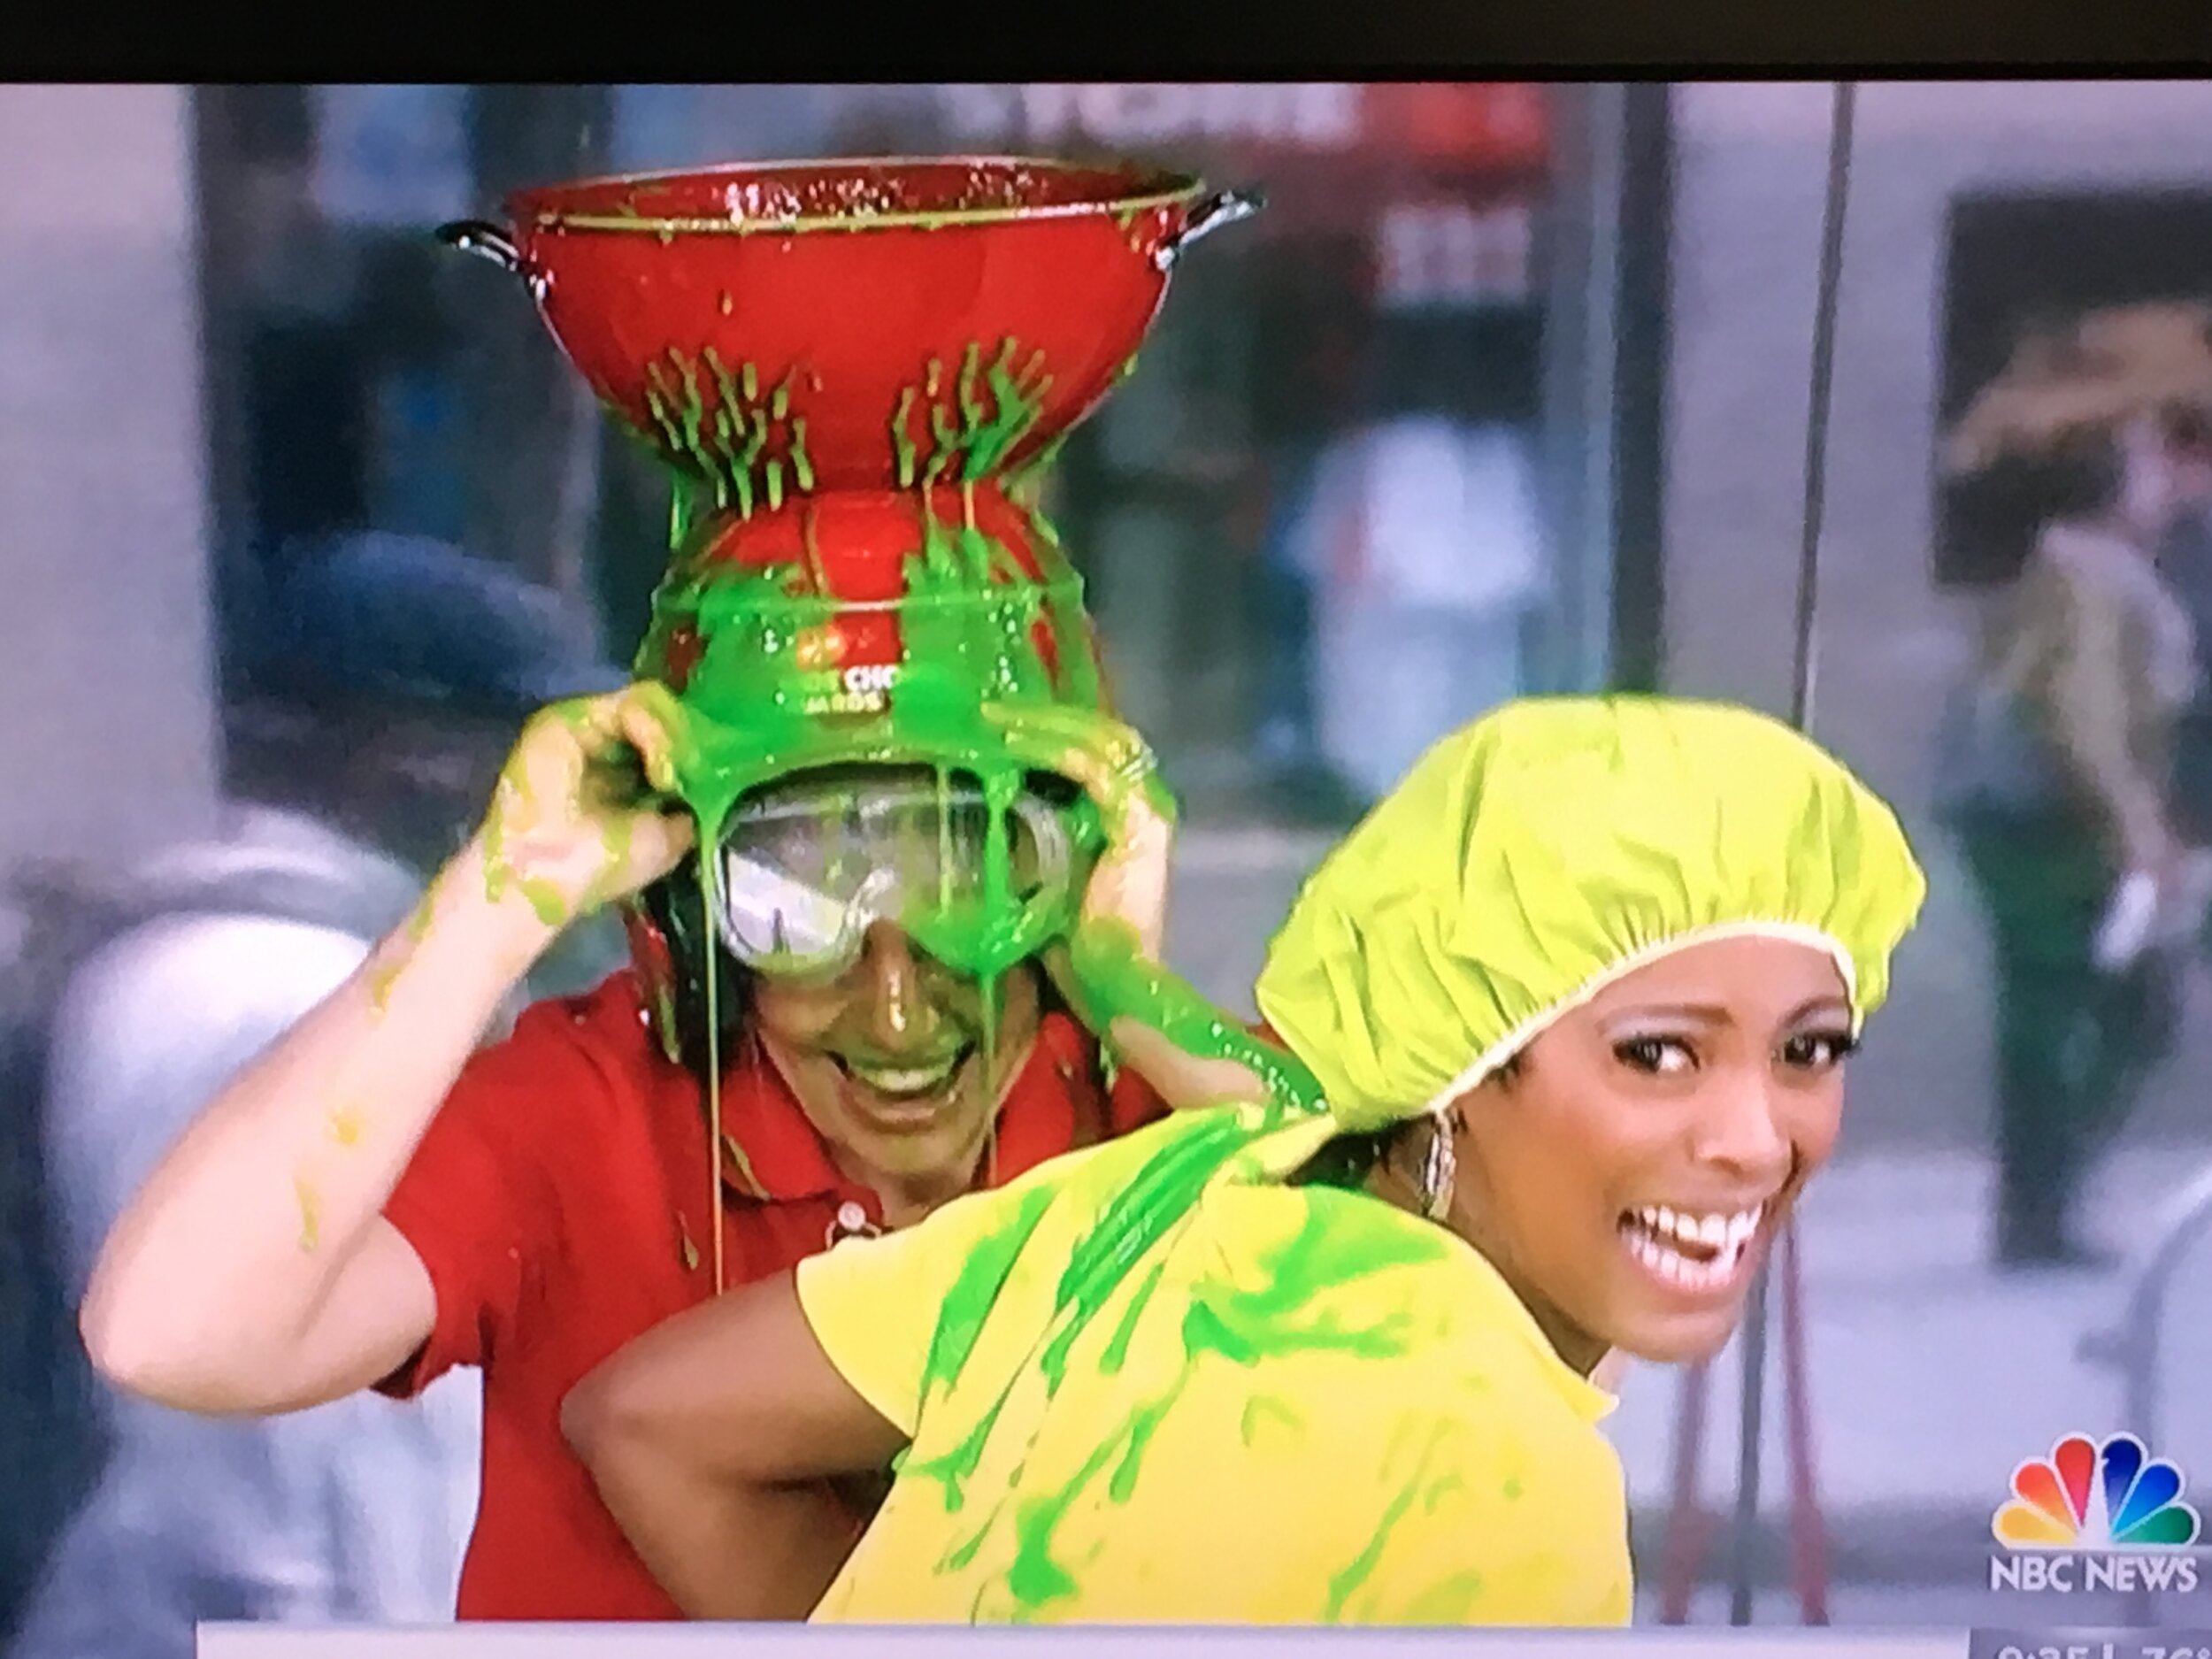 Today Show Slime Toss!